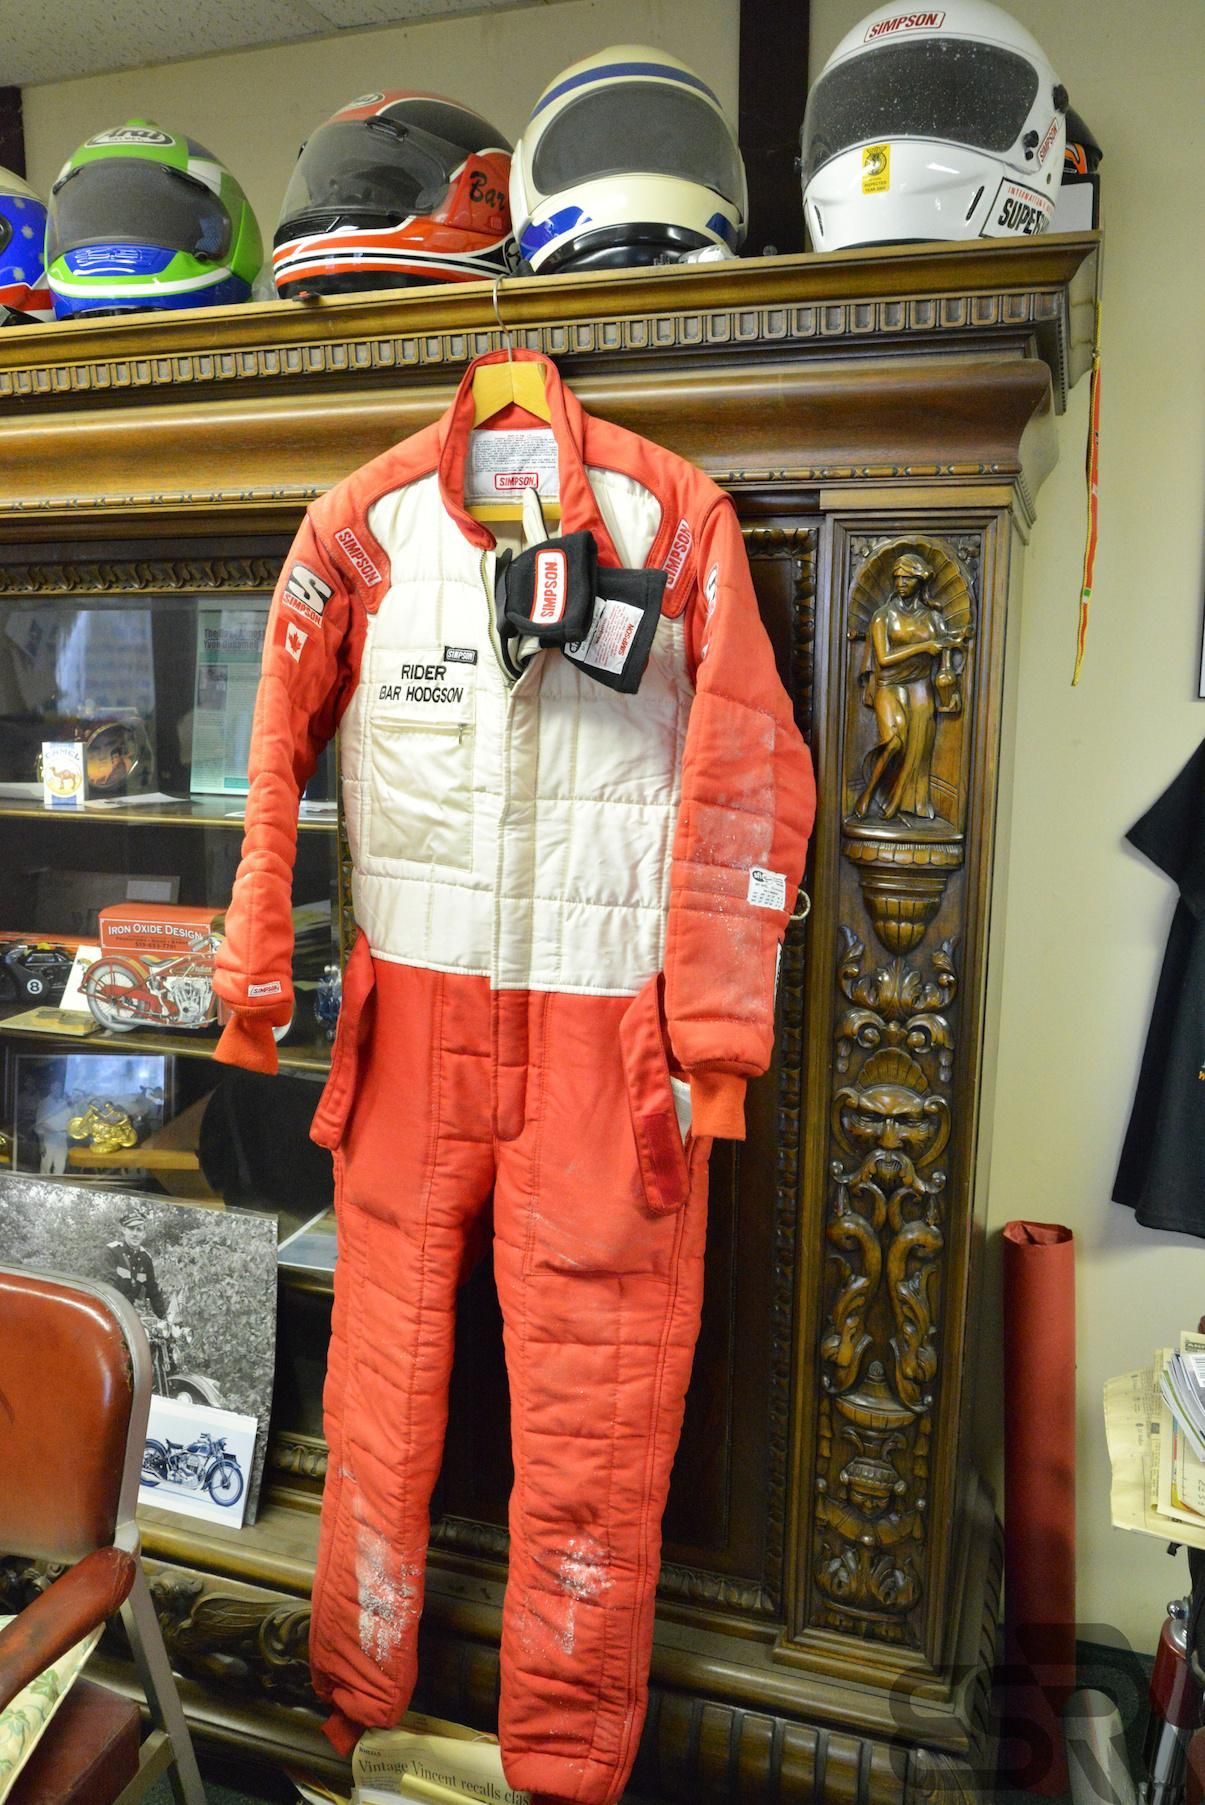 The suit Bar crashed in at Bonneville hangs proudly in his office